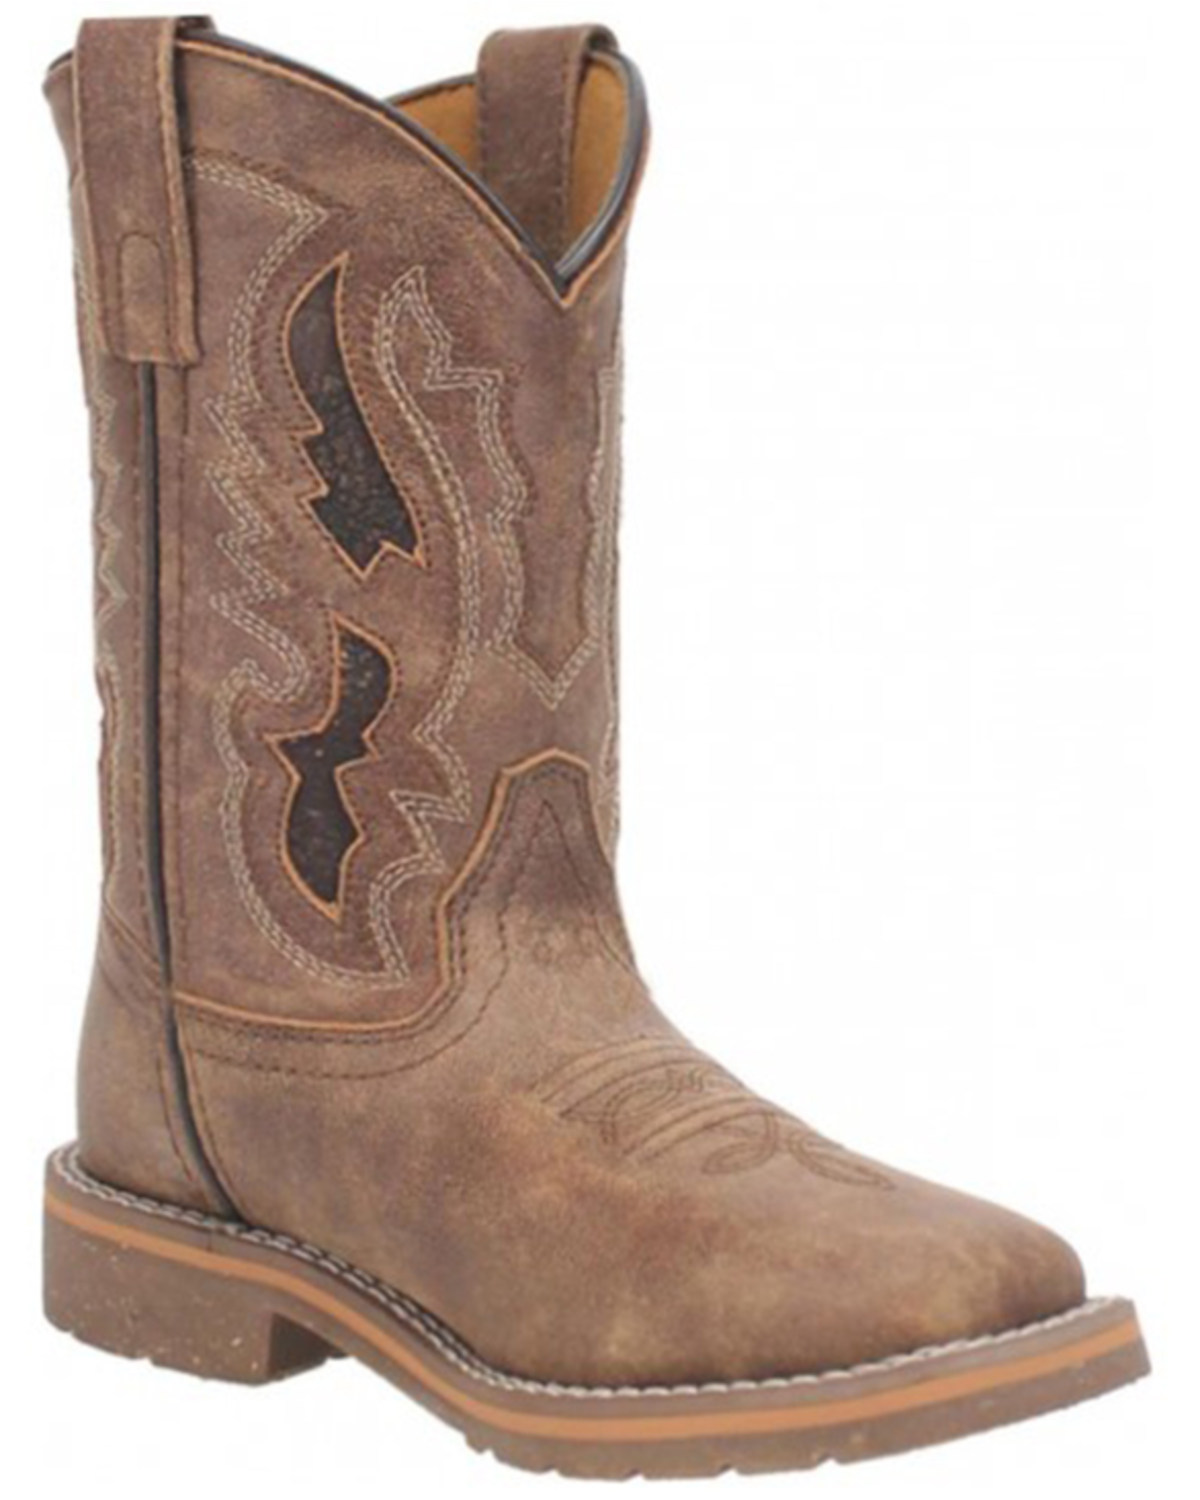 Dan Post Toddler Boys' Marty Western Boots - Broad Square Toe